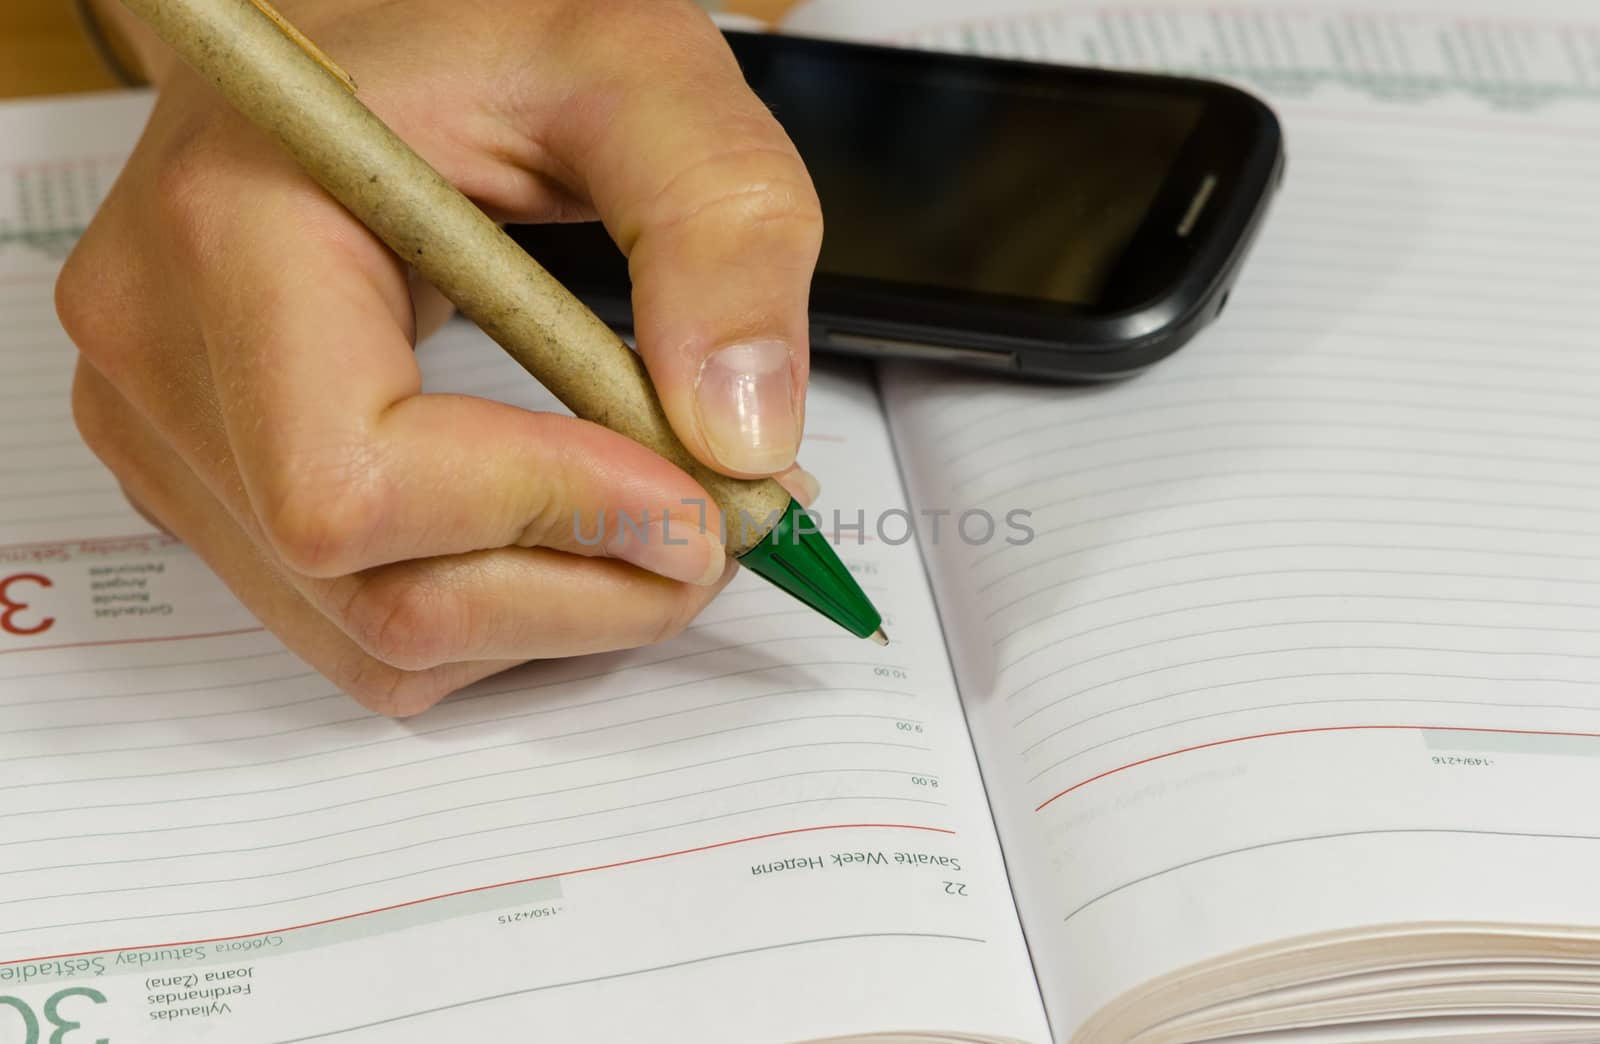 hand make write notes in notebook and smart phone by sauletas